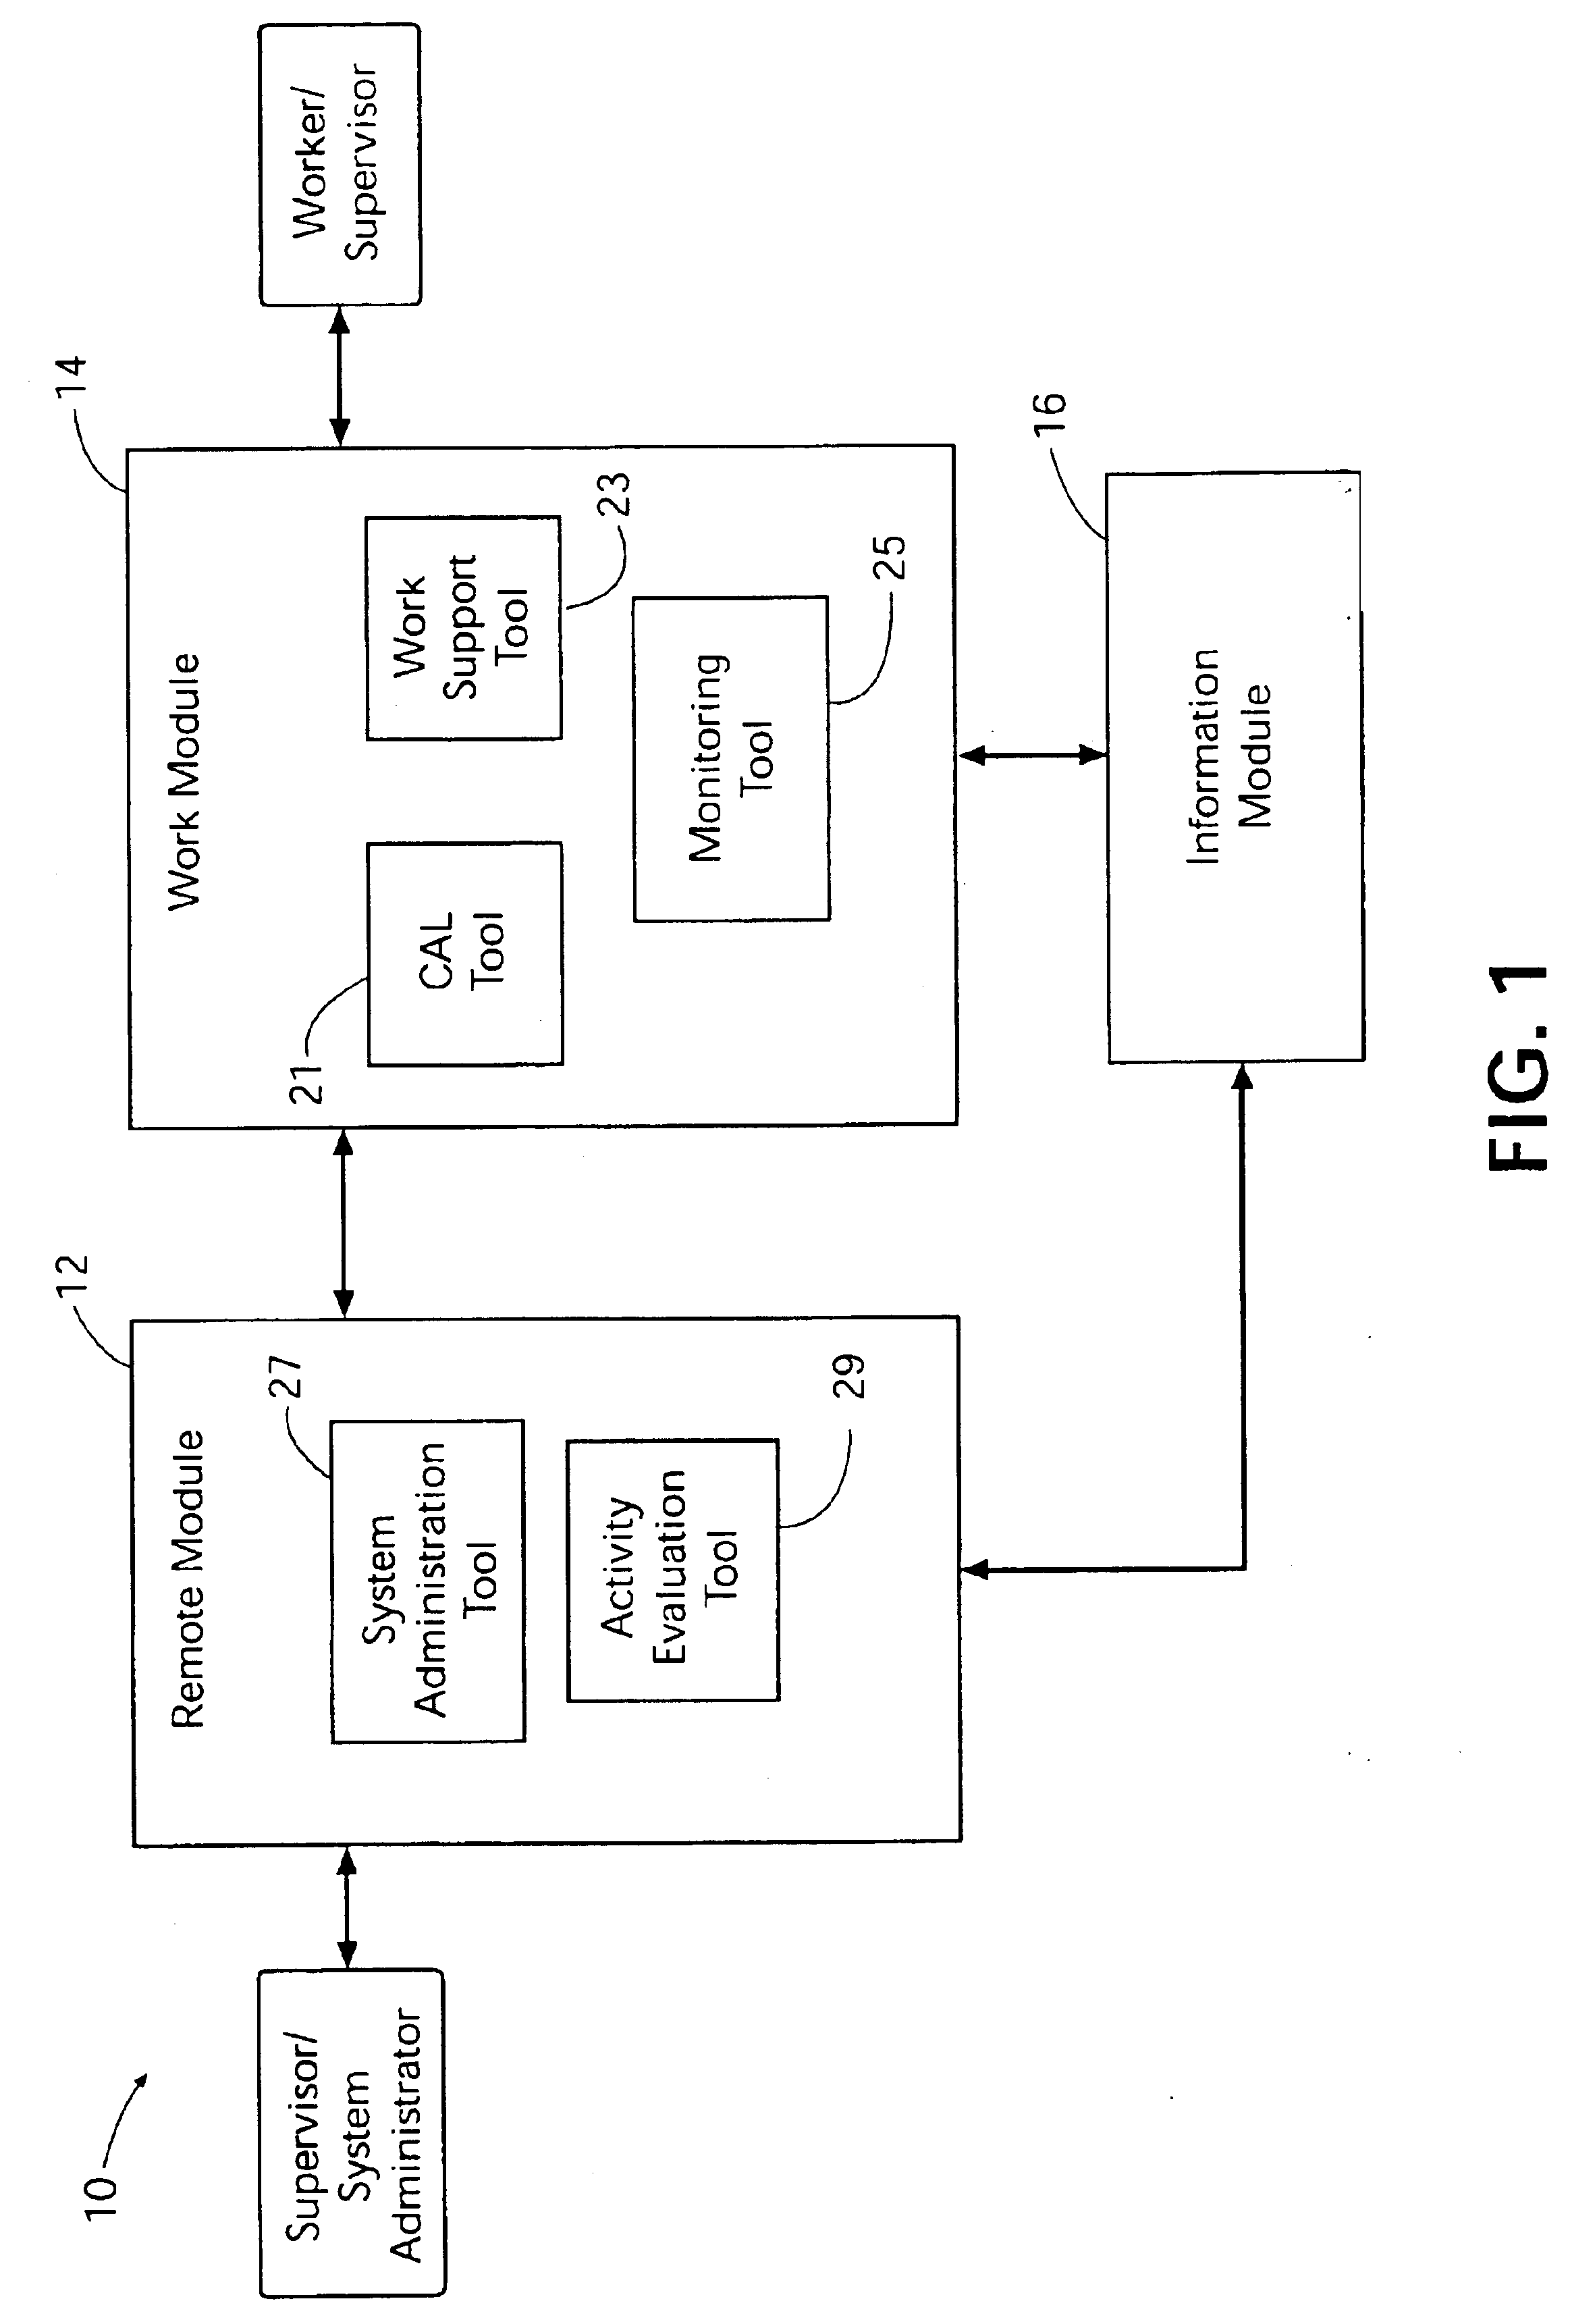 Method and system for remote electronic monitoring and mentoring of computer assisted performance support